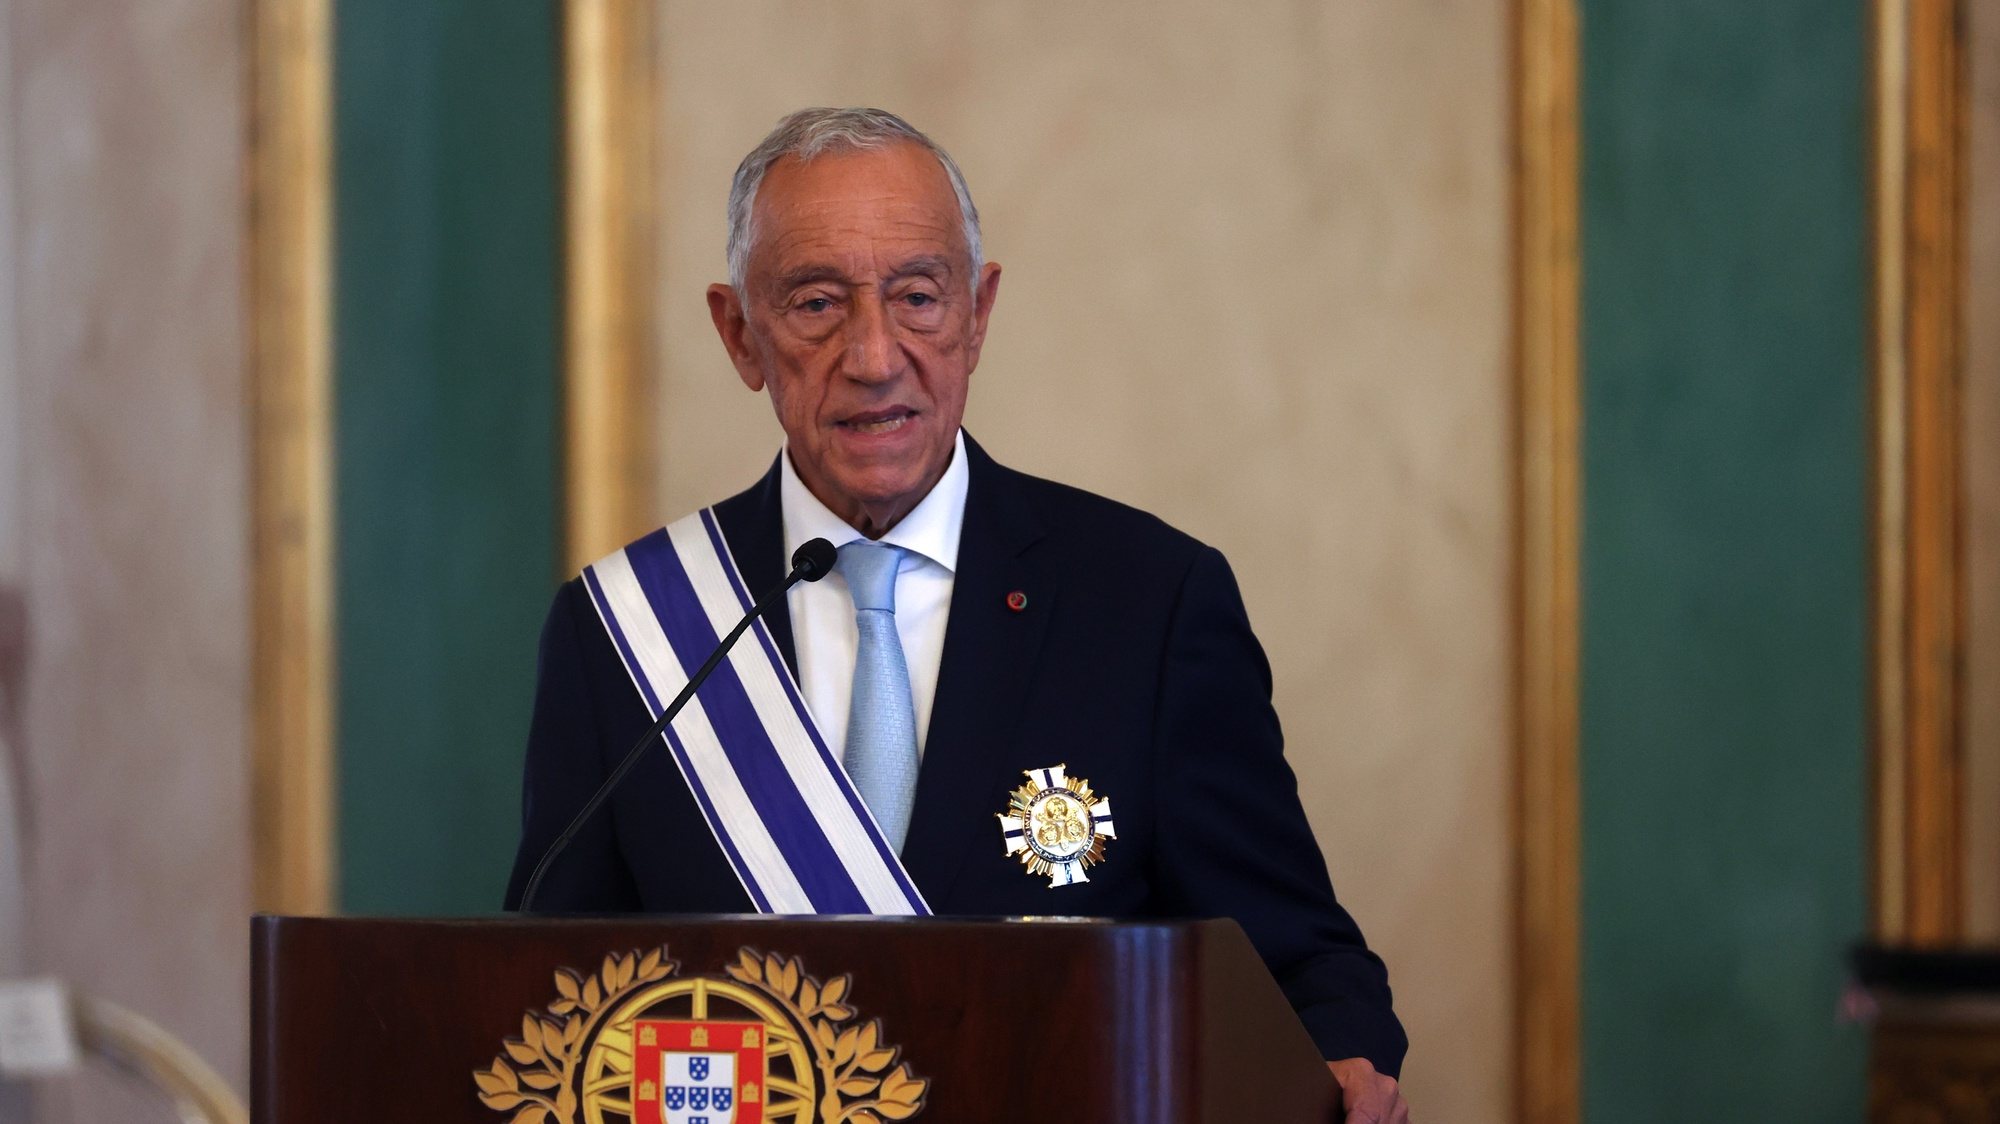 epa10539174 Portuguese President Marcelo Rebelo de Sousa speaks during a ceremony at the National Palace in Santo Domingo, Dominican Republic, 23 March 2023. President de Sousa is on an official visit to the Dominican Republic.  EPA/ORLANDO BARRIA